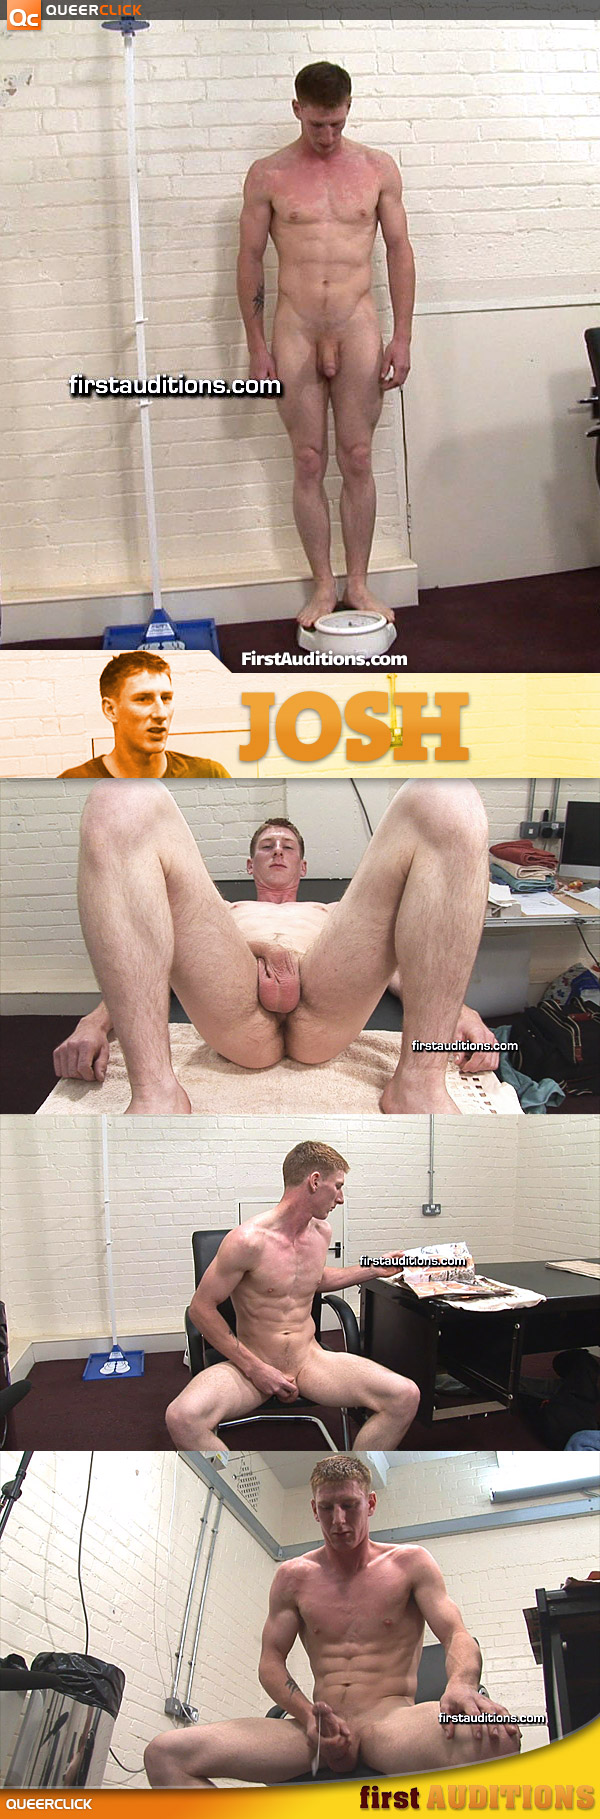 First Auditions: Josh